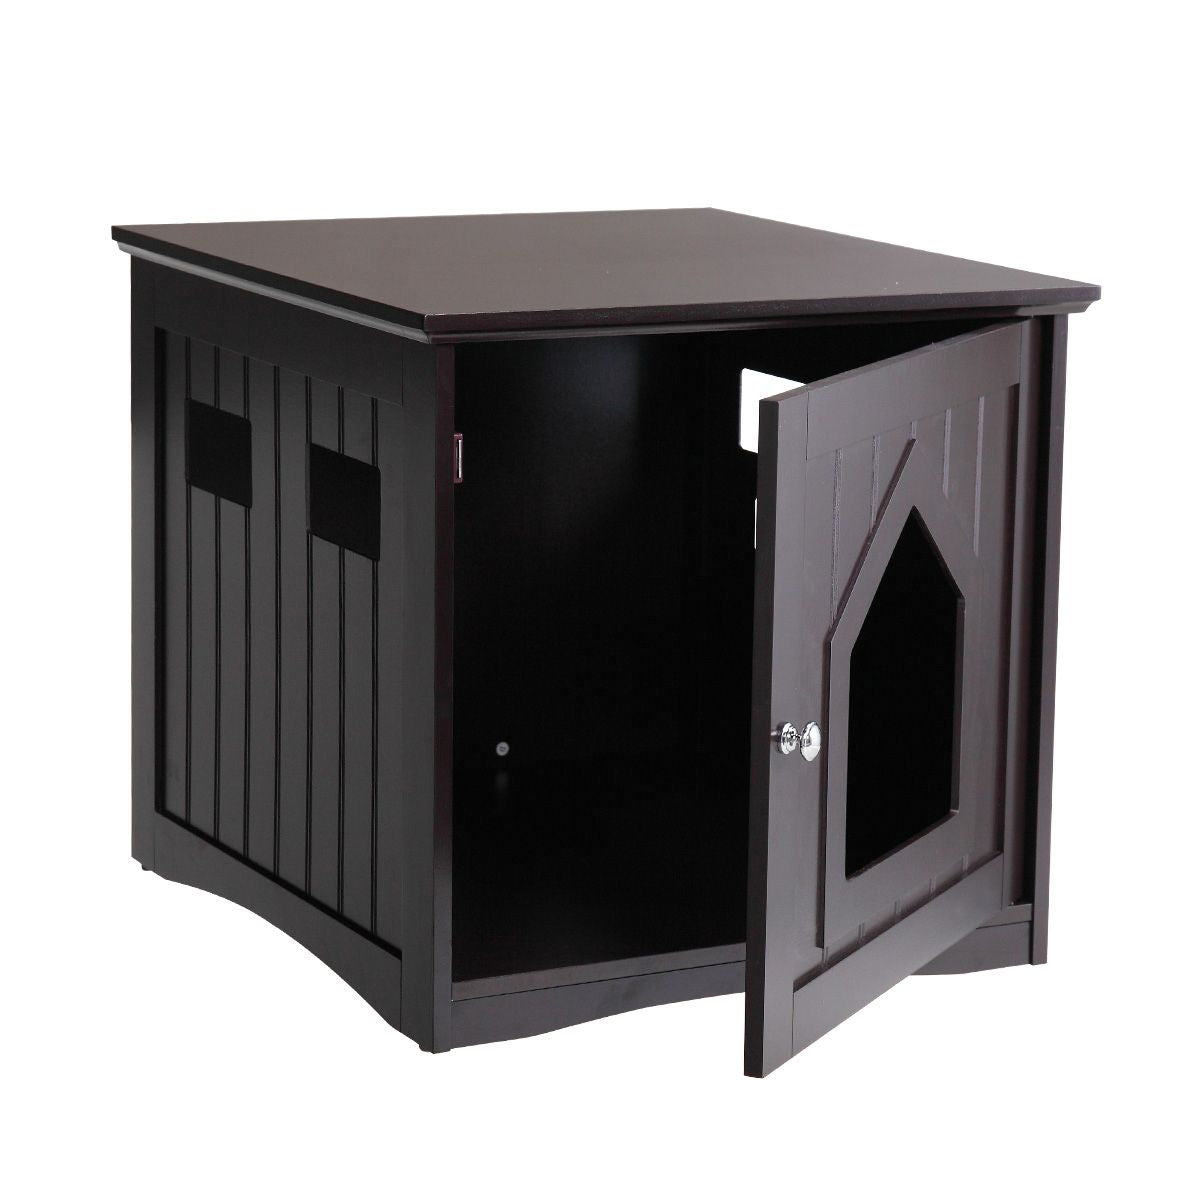 SHICHENG Decorative Cat House & Side Table - Cat Home Covered Nightstand - Indoor Pet Crate - Litter Box Enclosure - Hooded Hidden Pet Box - Cats Furniture Cabinet - Kitty Washroom